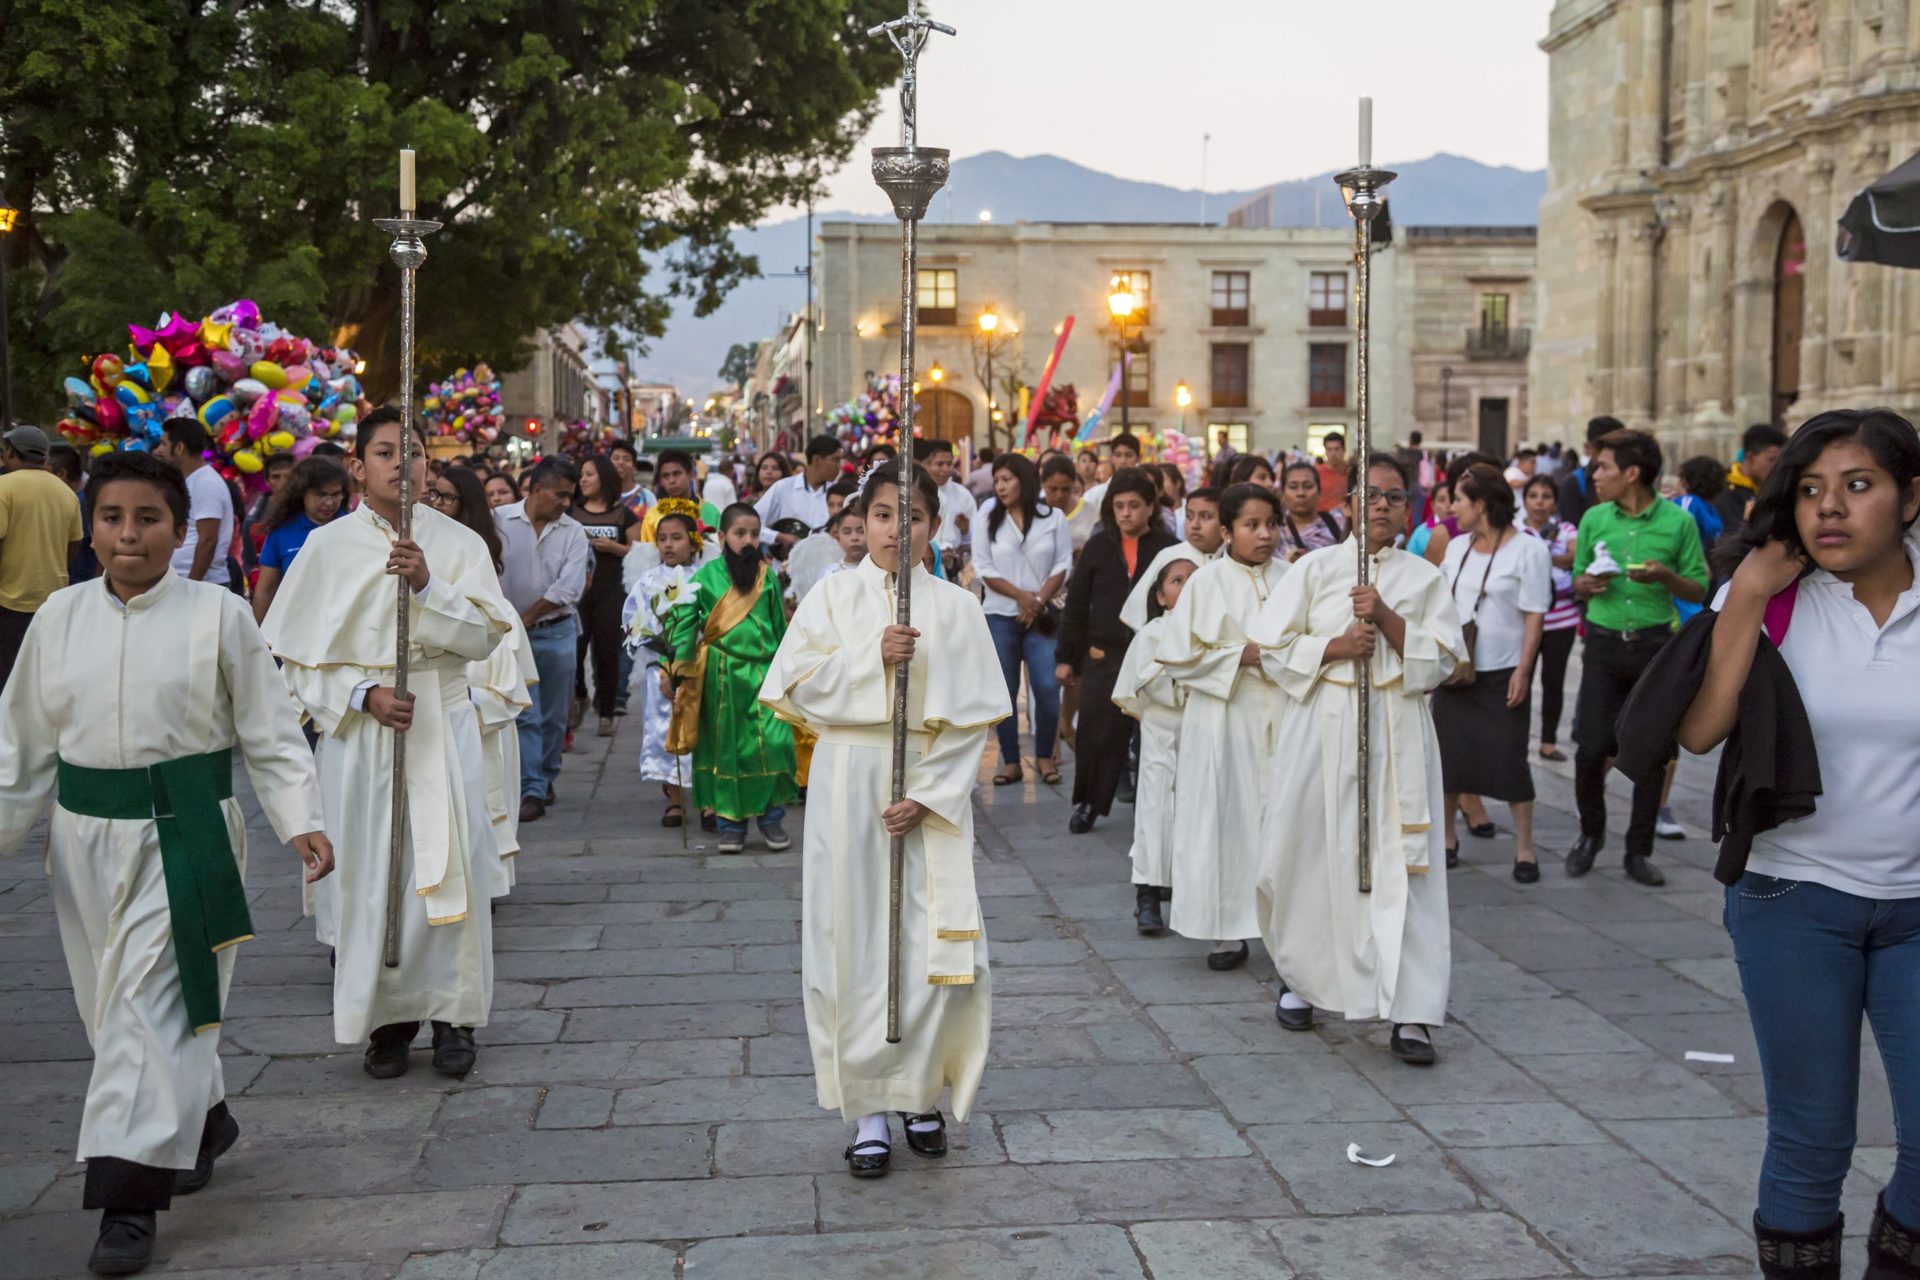 Altar servers lead a procession in celebration of "Dia de la Candelaria", or Candlemas Day. Photo: CNS/Jim West)